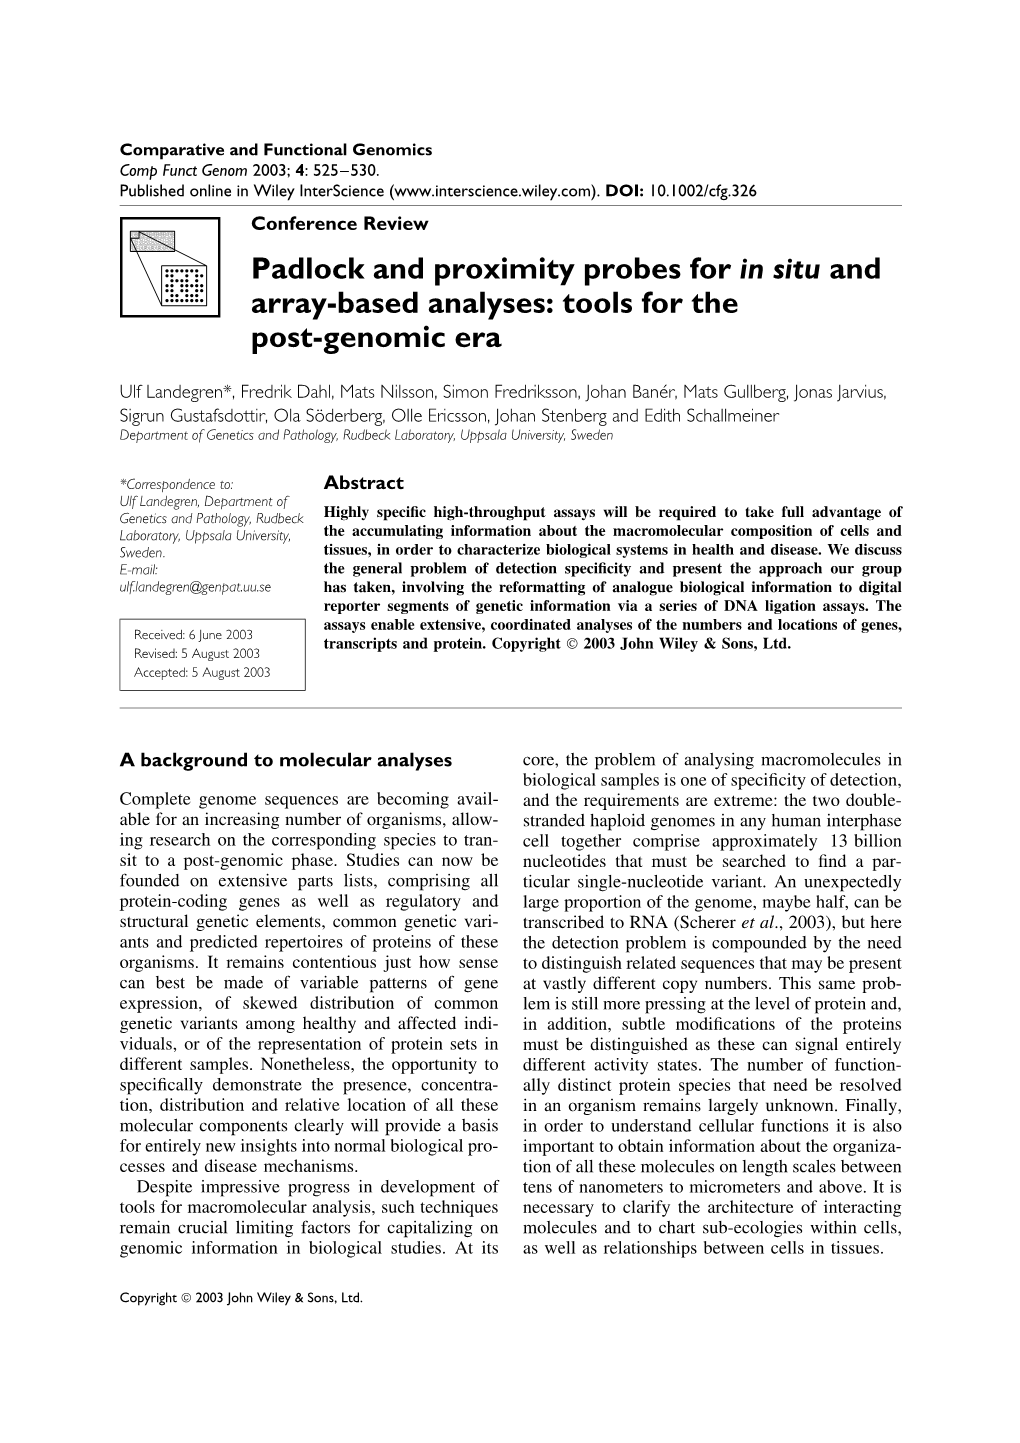 Padlock and Proximity Probes for in Situ and Array-Based Analyses: Tools for the Post-Genomic Era